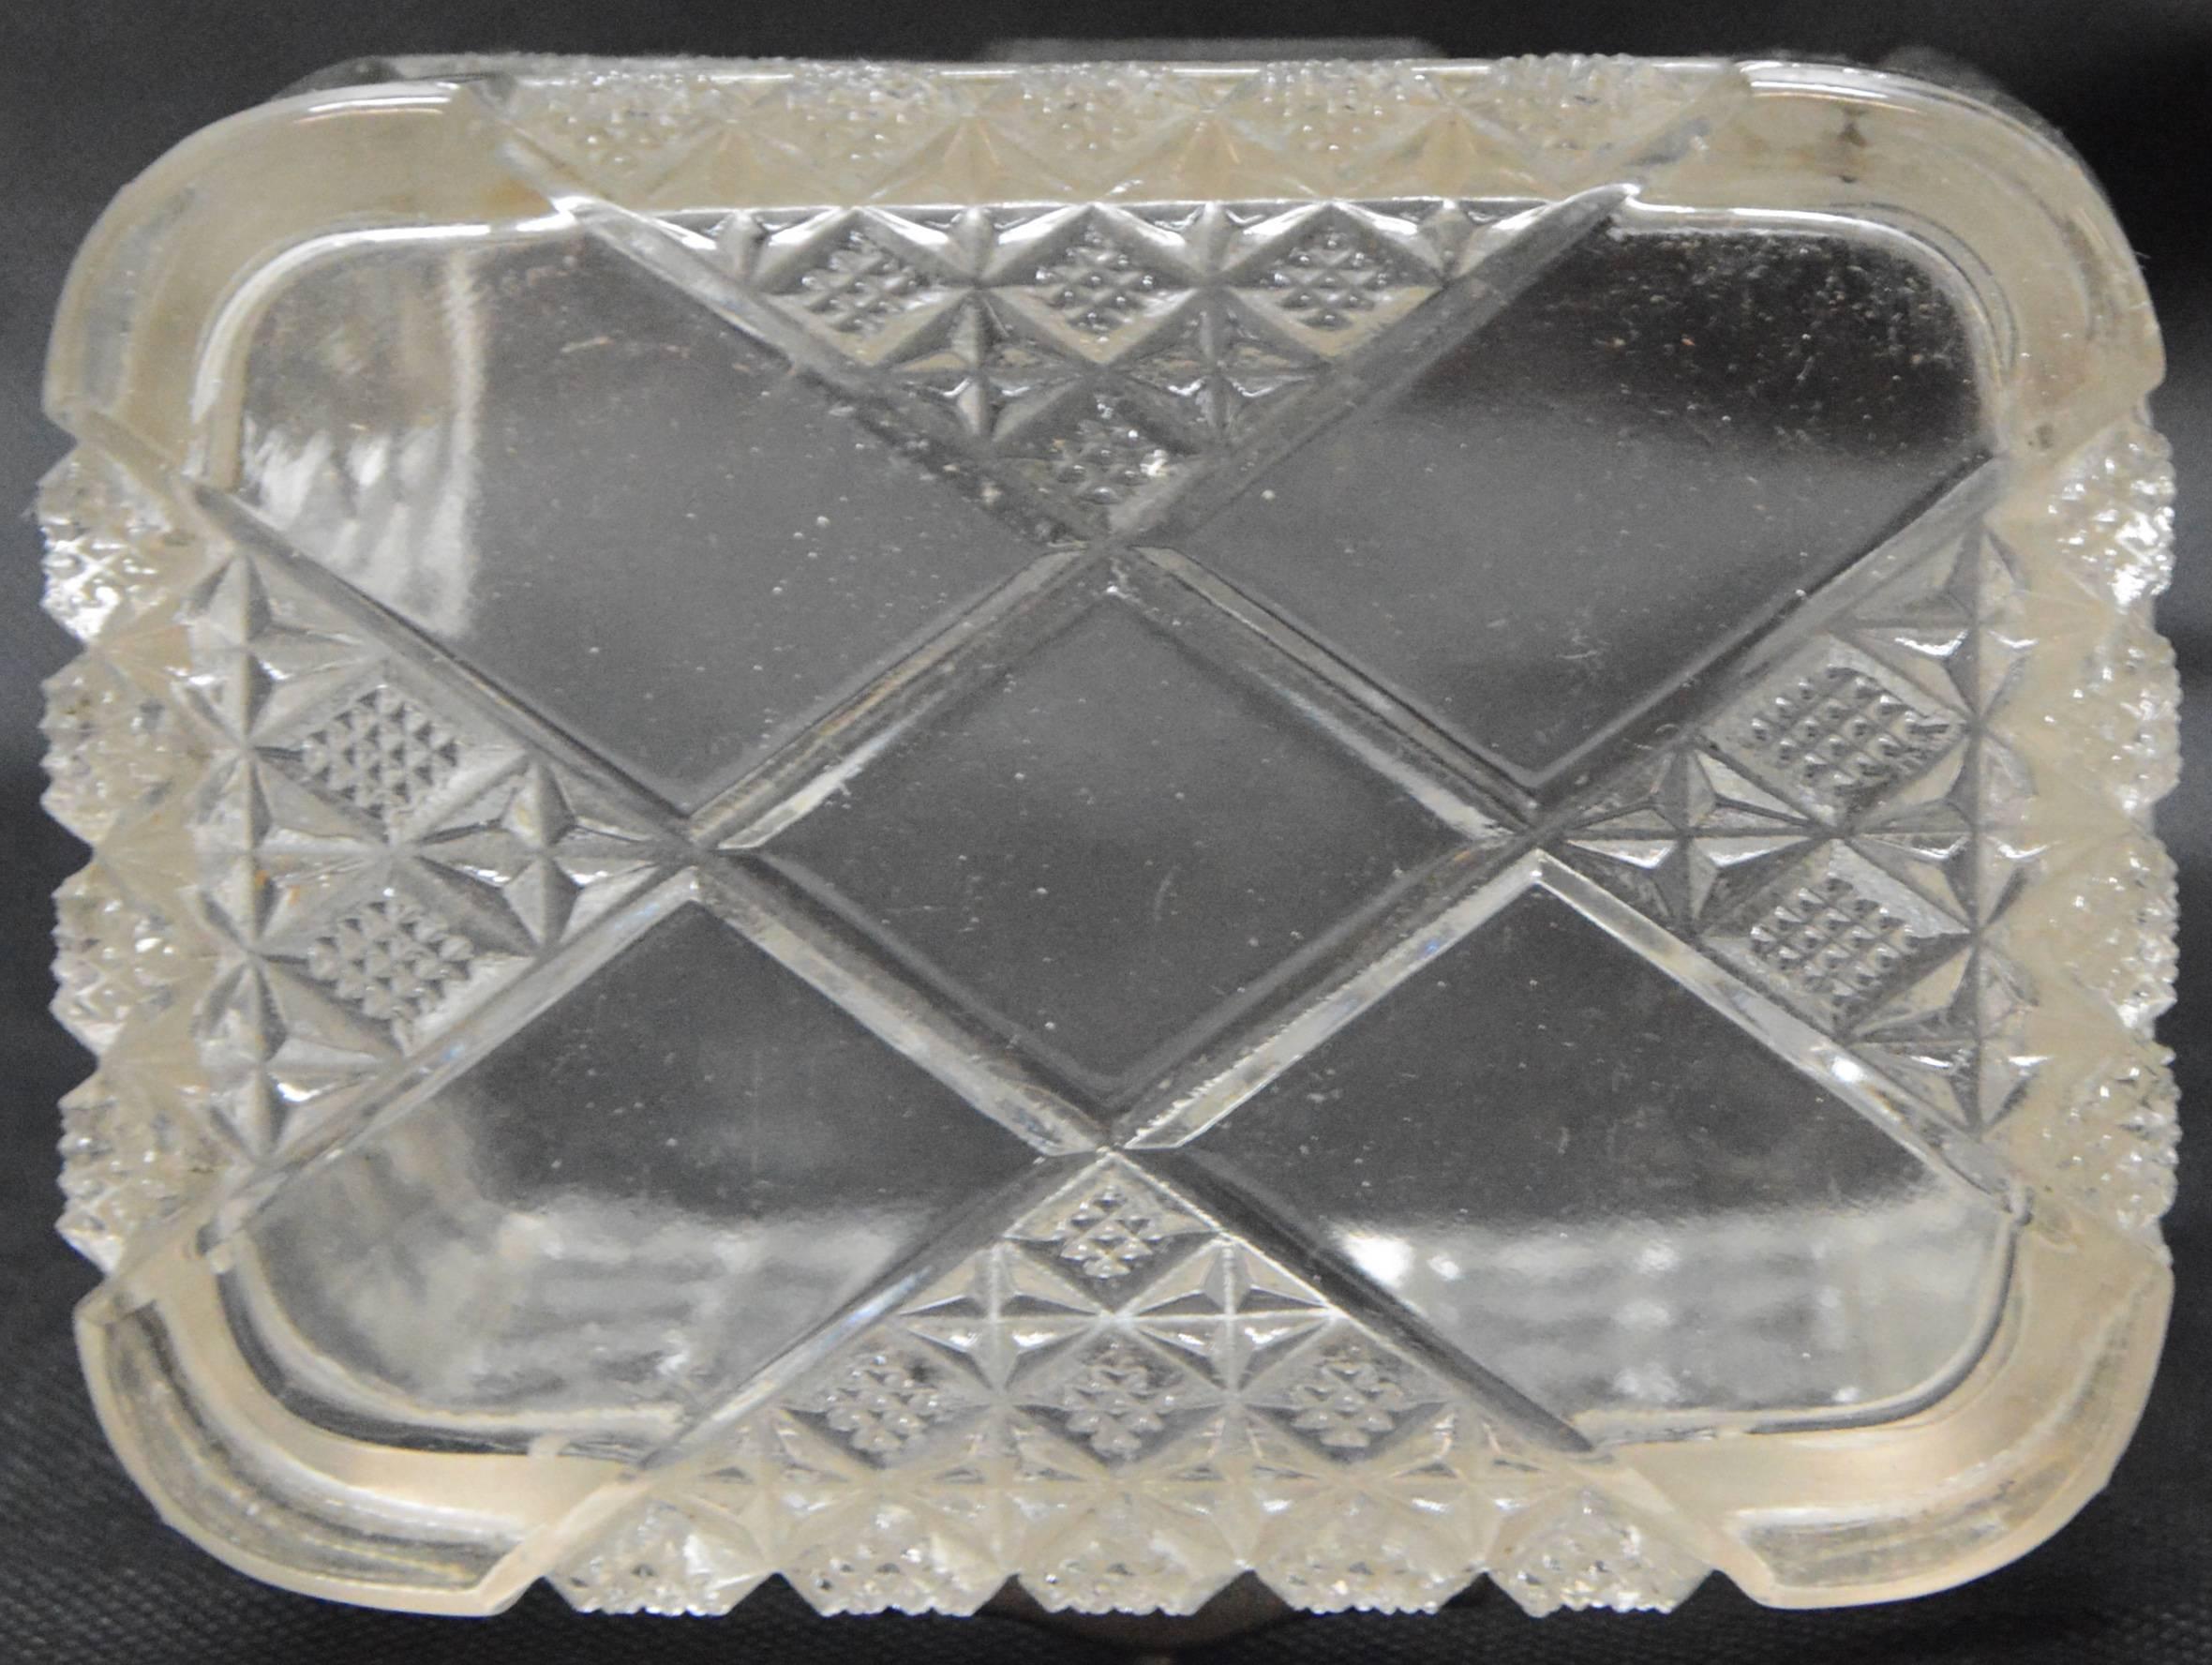 This is a stunning antique lidded pressed glass casket. The box is composed of pressed glass with panels decorated with a strawberry cut pattern throughout the exterior and silver tone panels along the corners and the closure clasp. It appears the